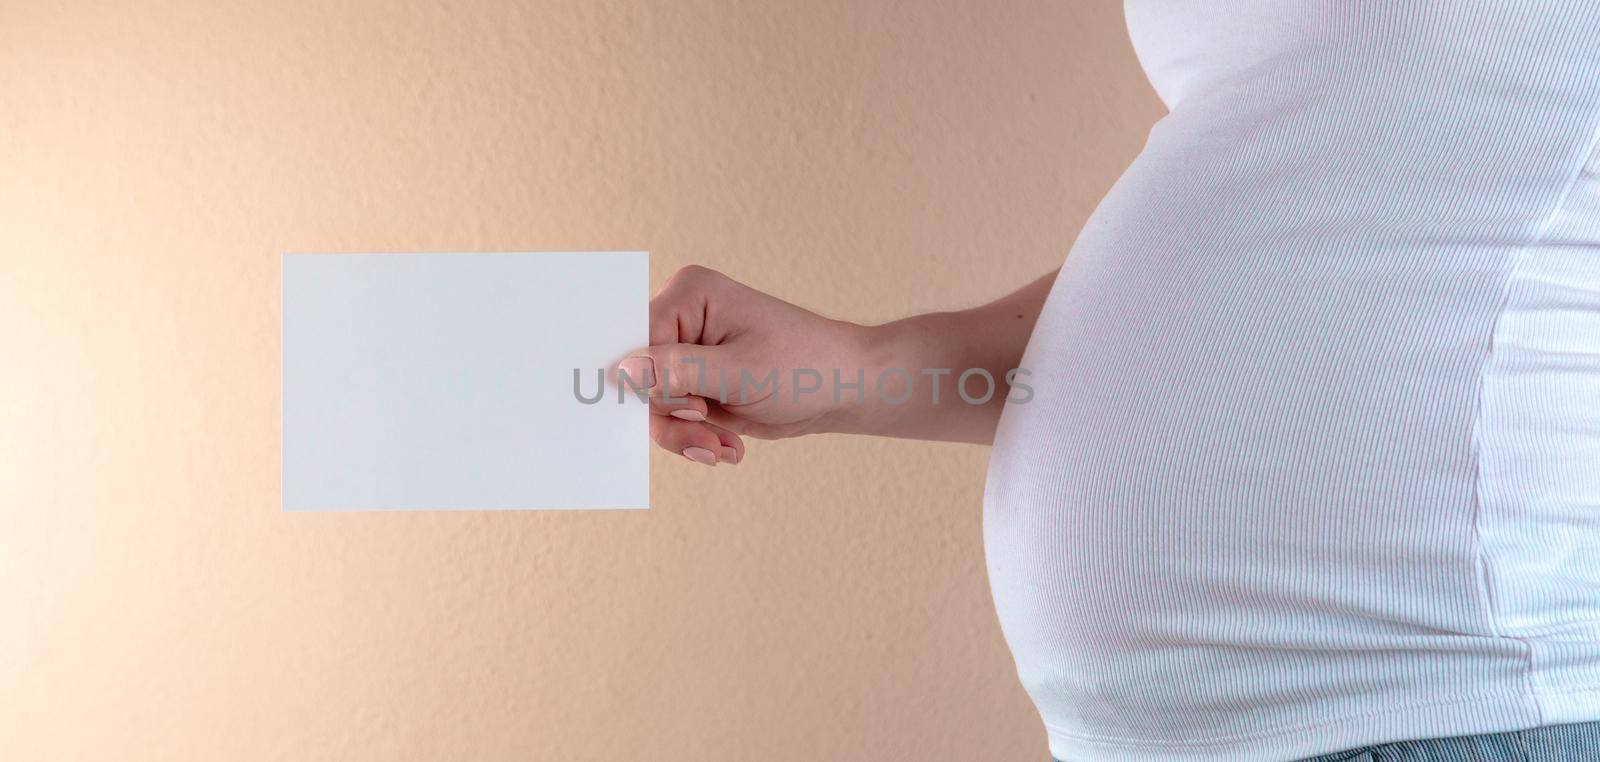 A close-up view of the belly of a pregnant woman in a white T-shirt that is holding an empty sheet of paper